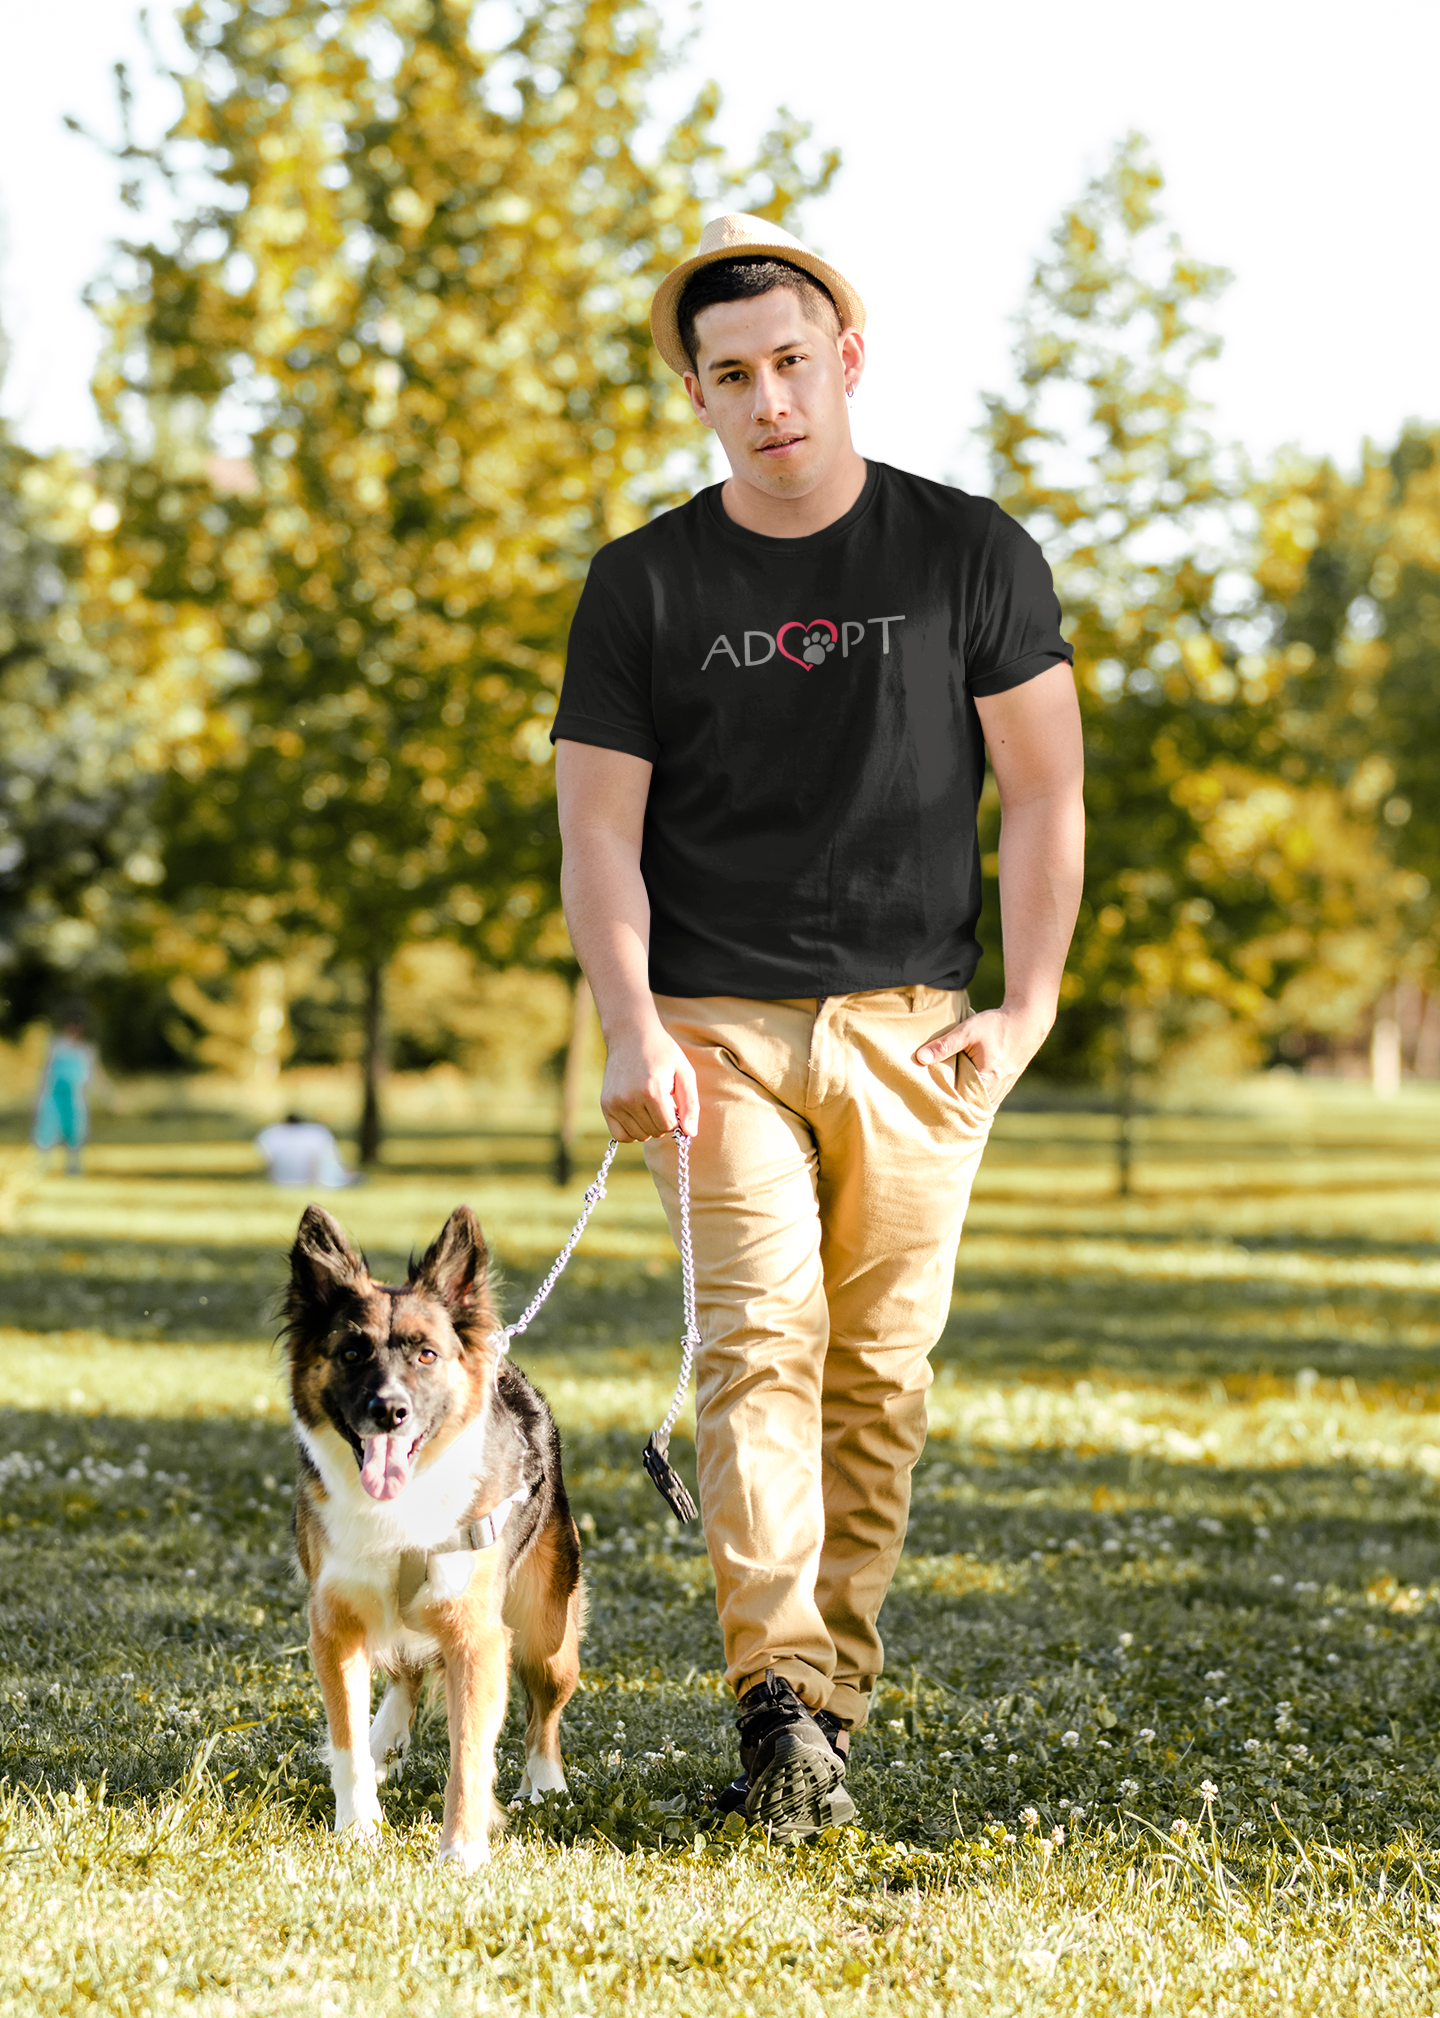 A handsome young man walking his dog in a grassy setting with trees; the man is wearing a black t-shirt that says ADOPT on it but the letter O is the shape of a red heart with a paw print in the center to promote adopting pets